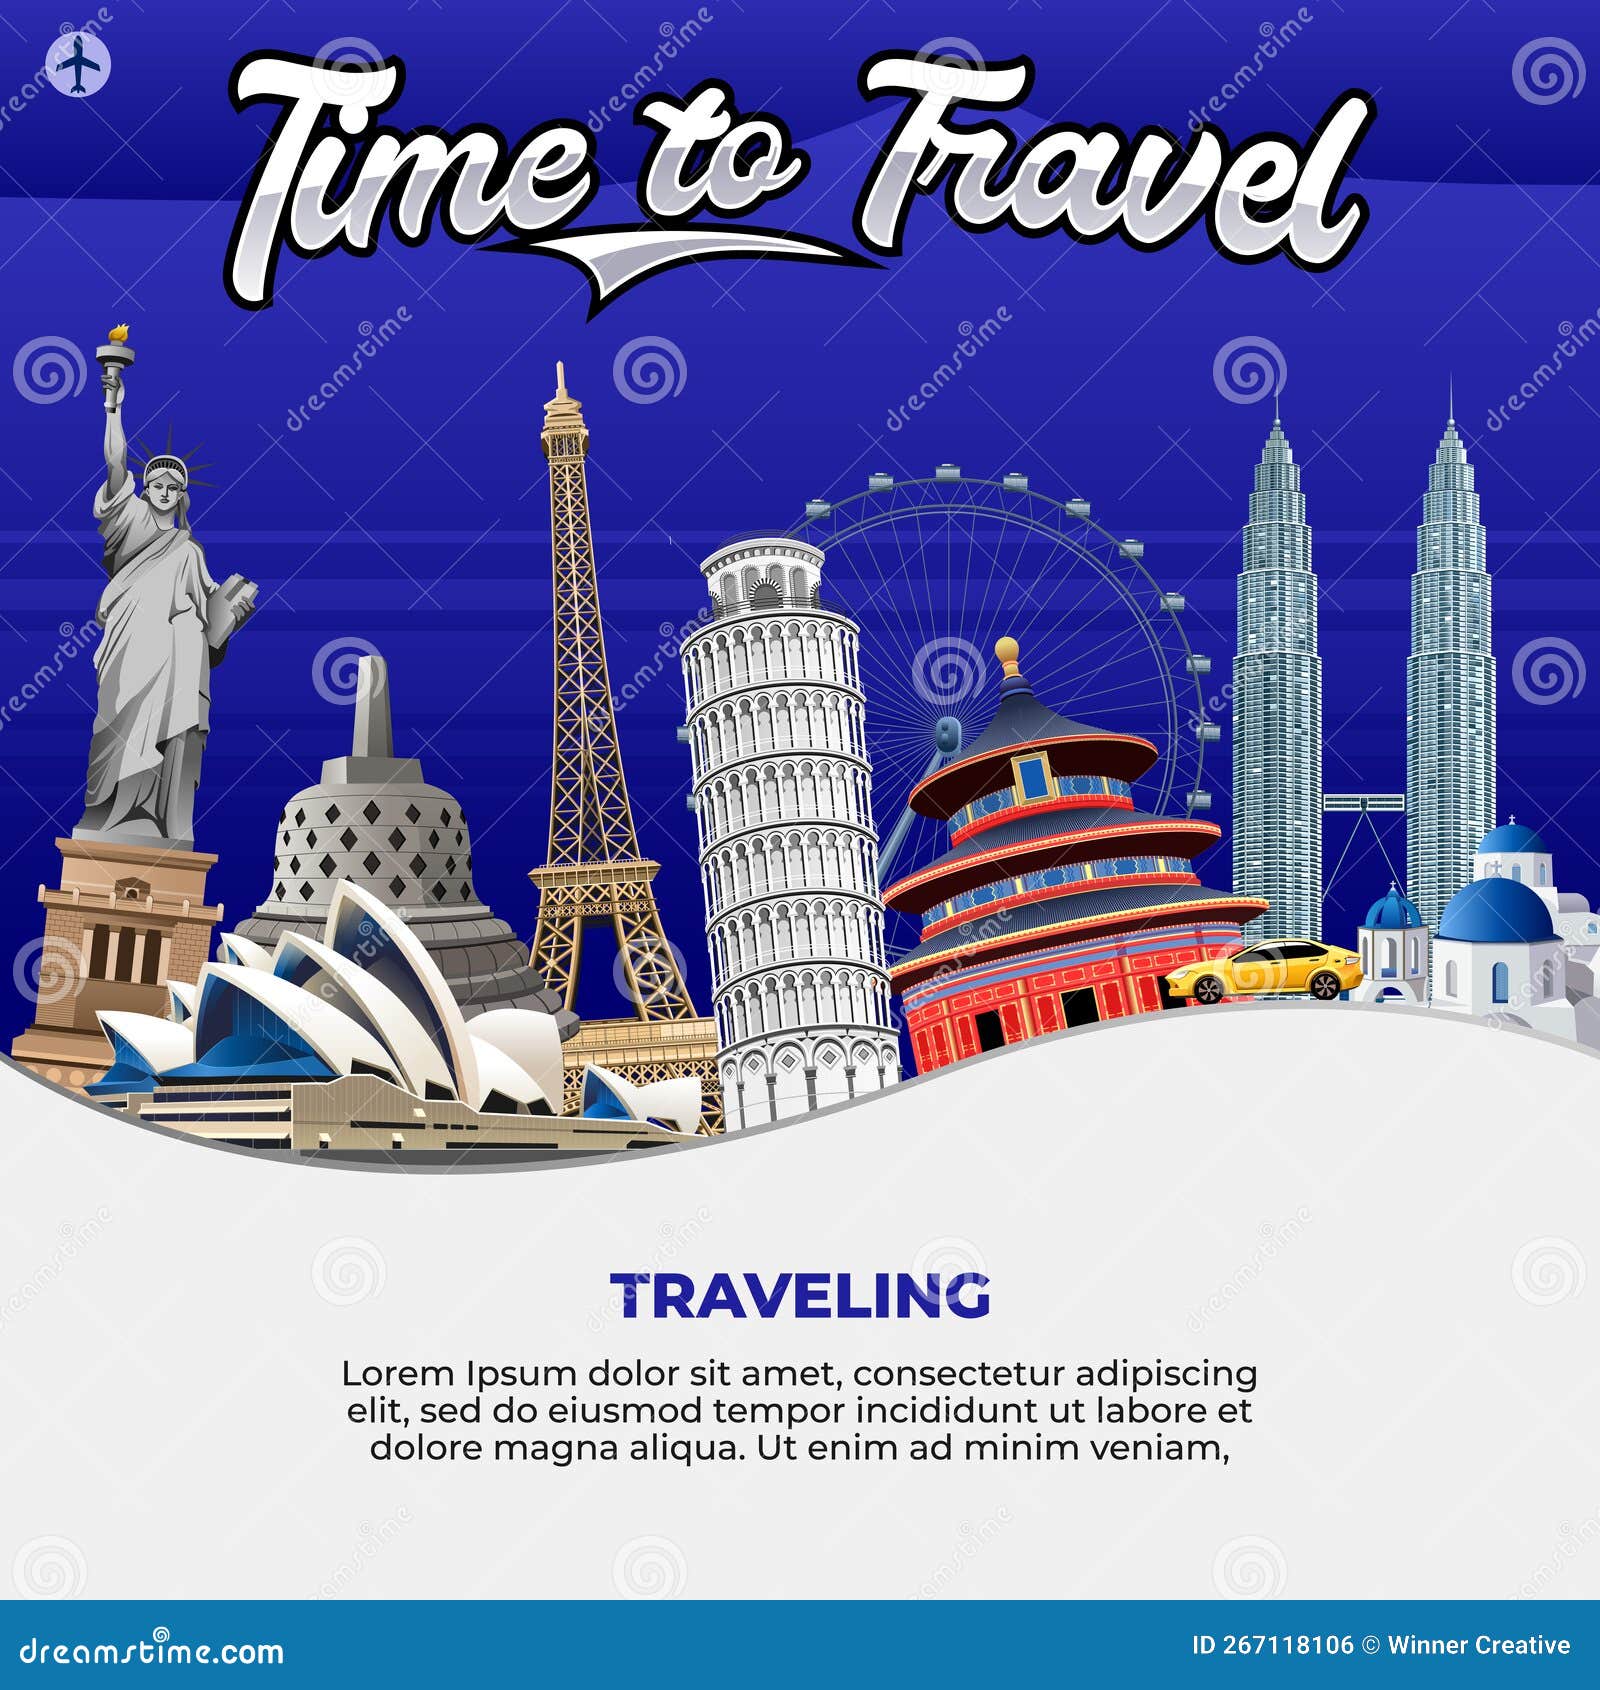 World Travel Vector Illustration. Tour and Travel Graphic Design for ...